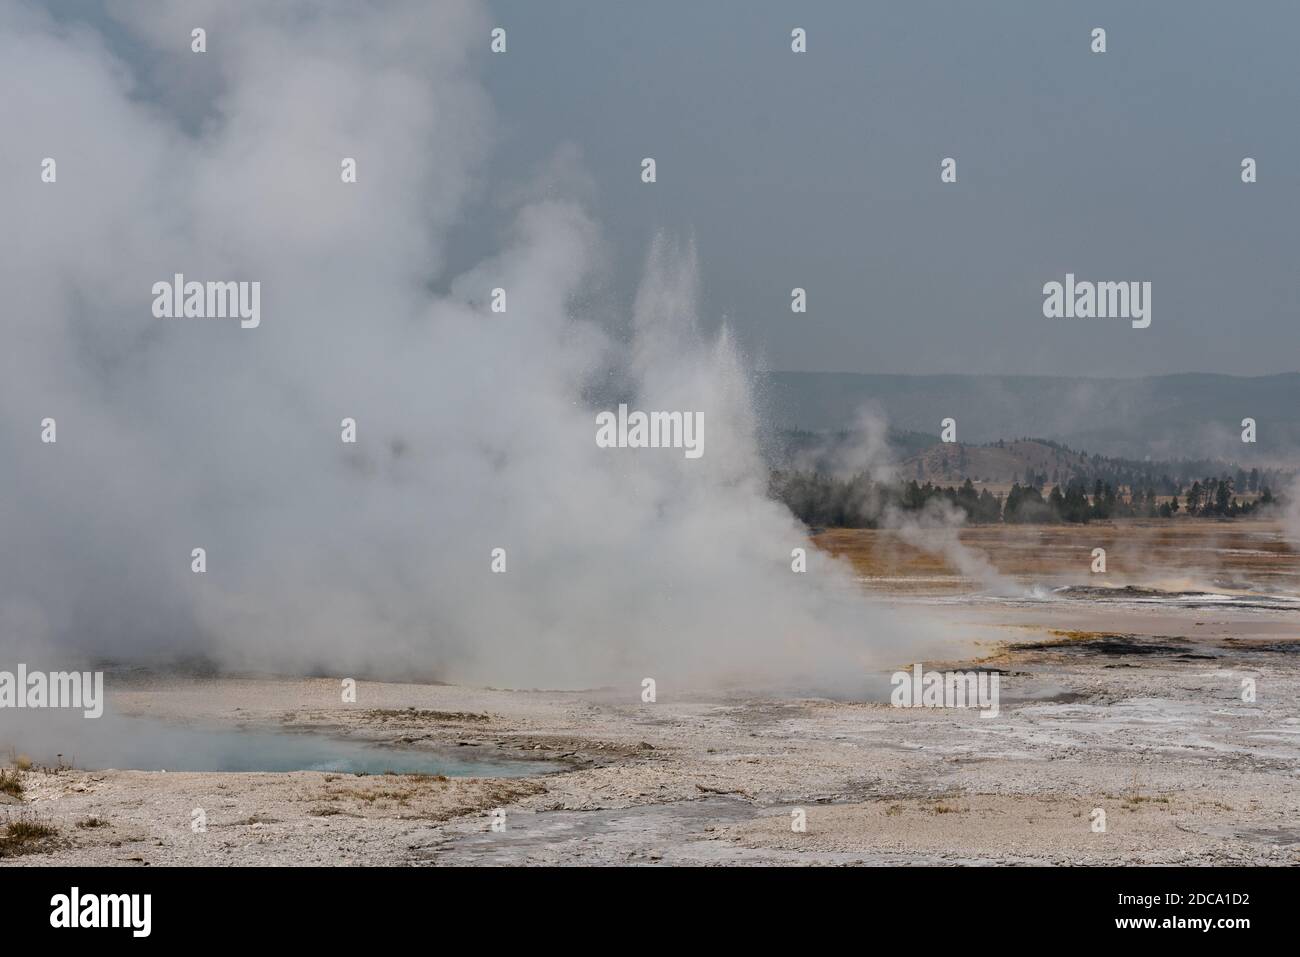 Clepsydra Geyser erupting in the Lower Geyser Basin in Yellowstone National Park, Wyoming, USA. Stock Photo